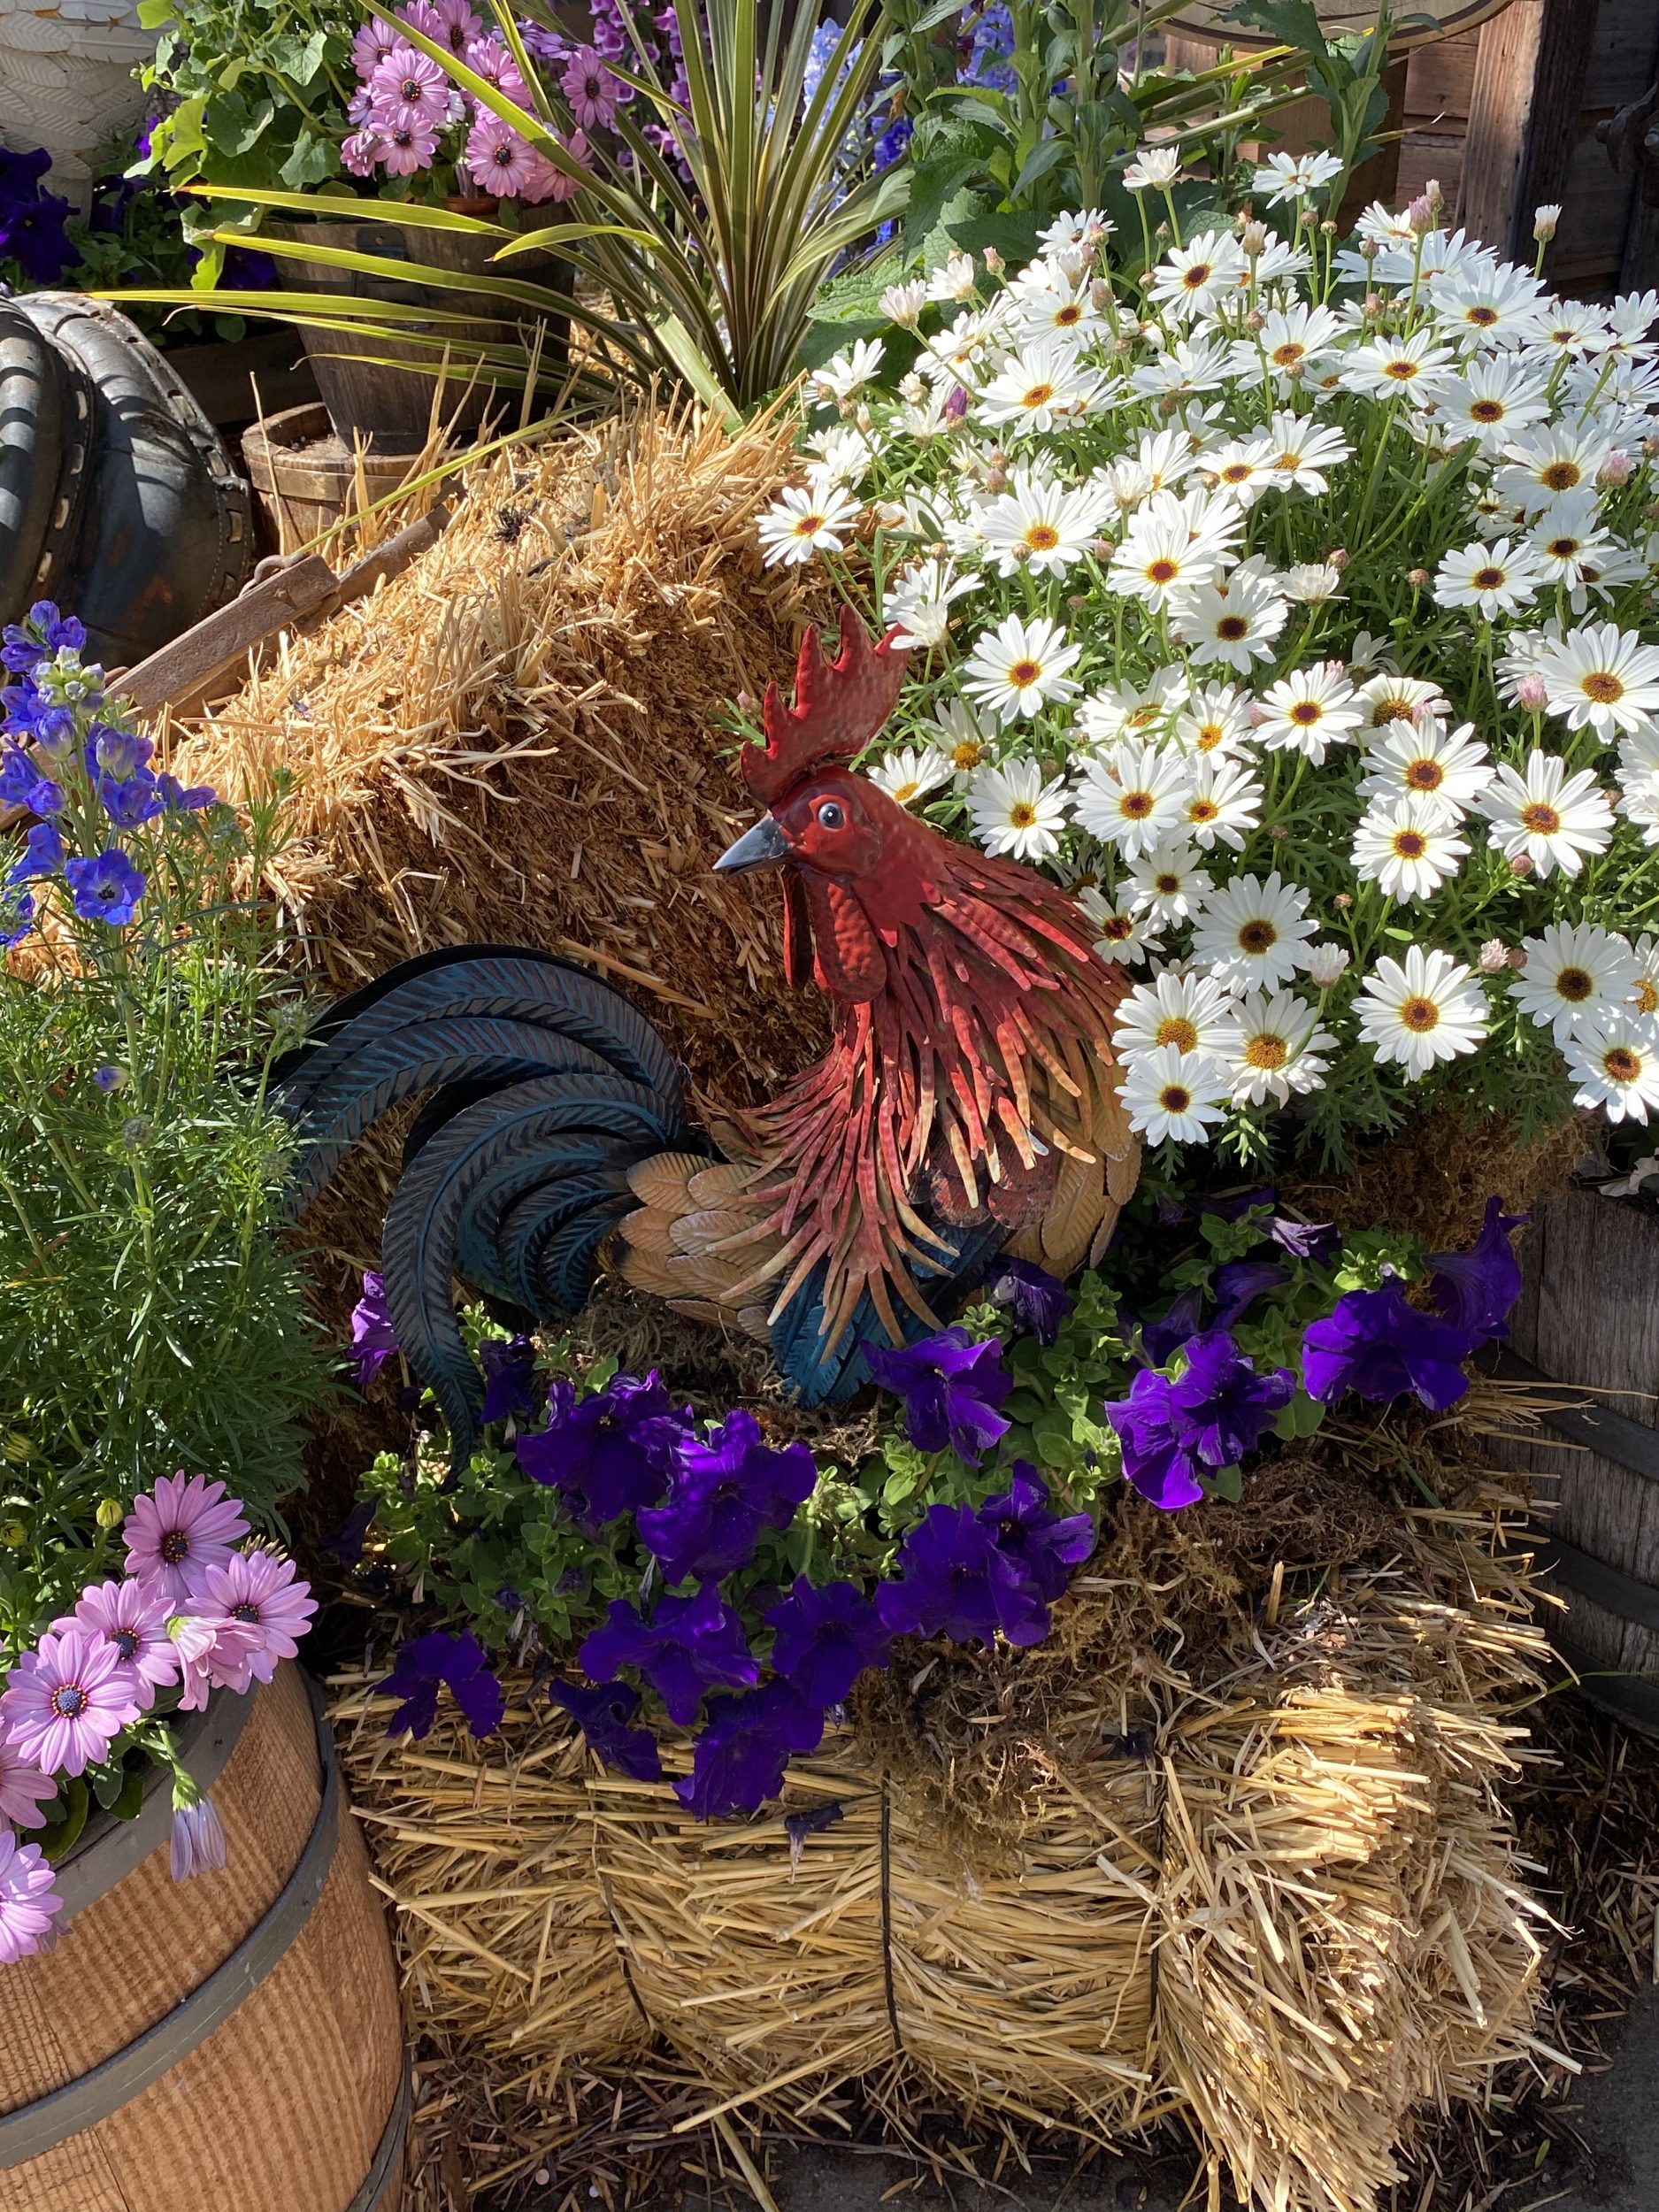 Colorful rooster on display at Knott's Berry Farm